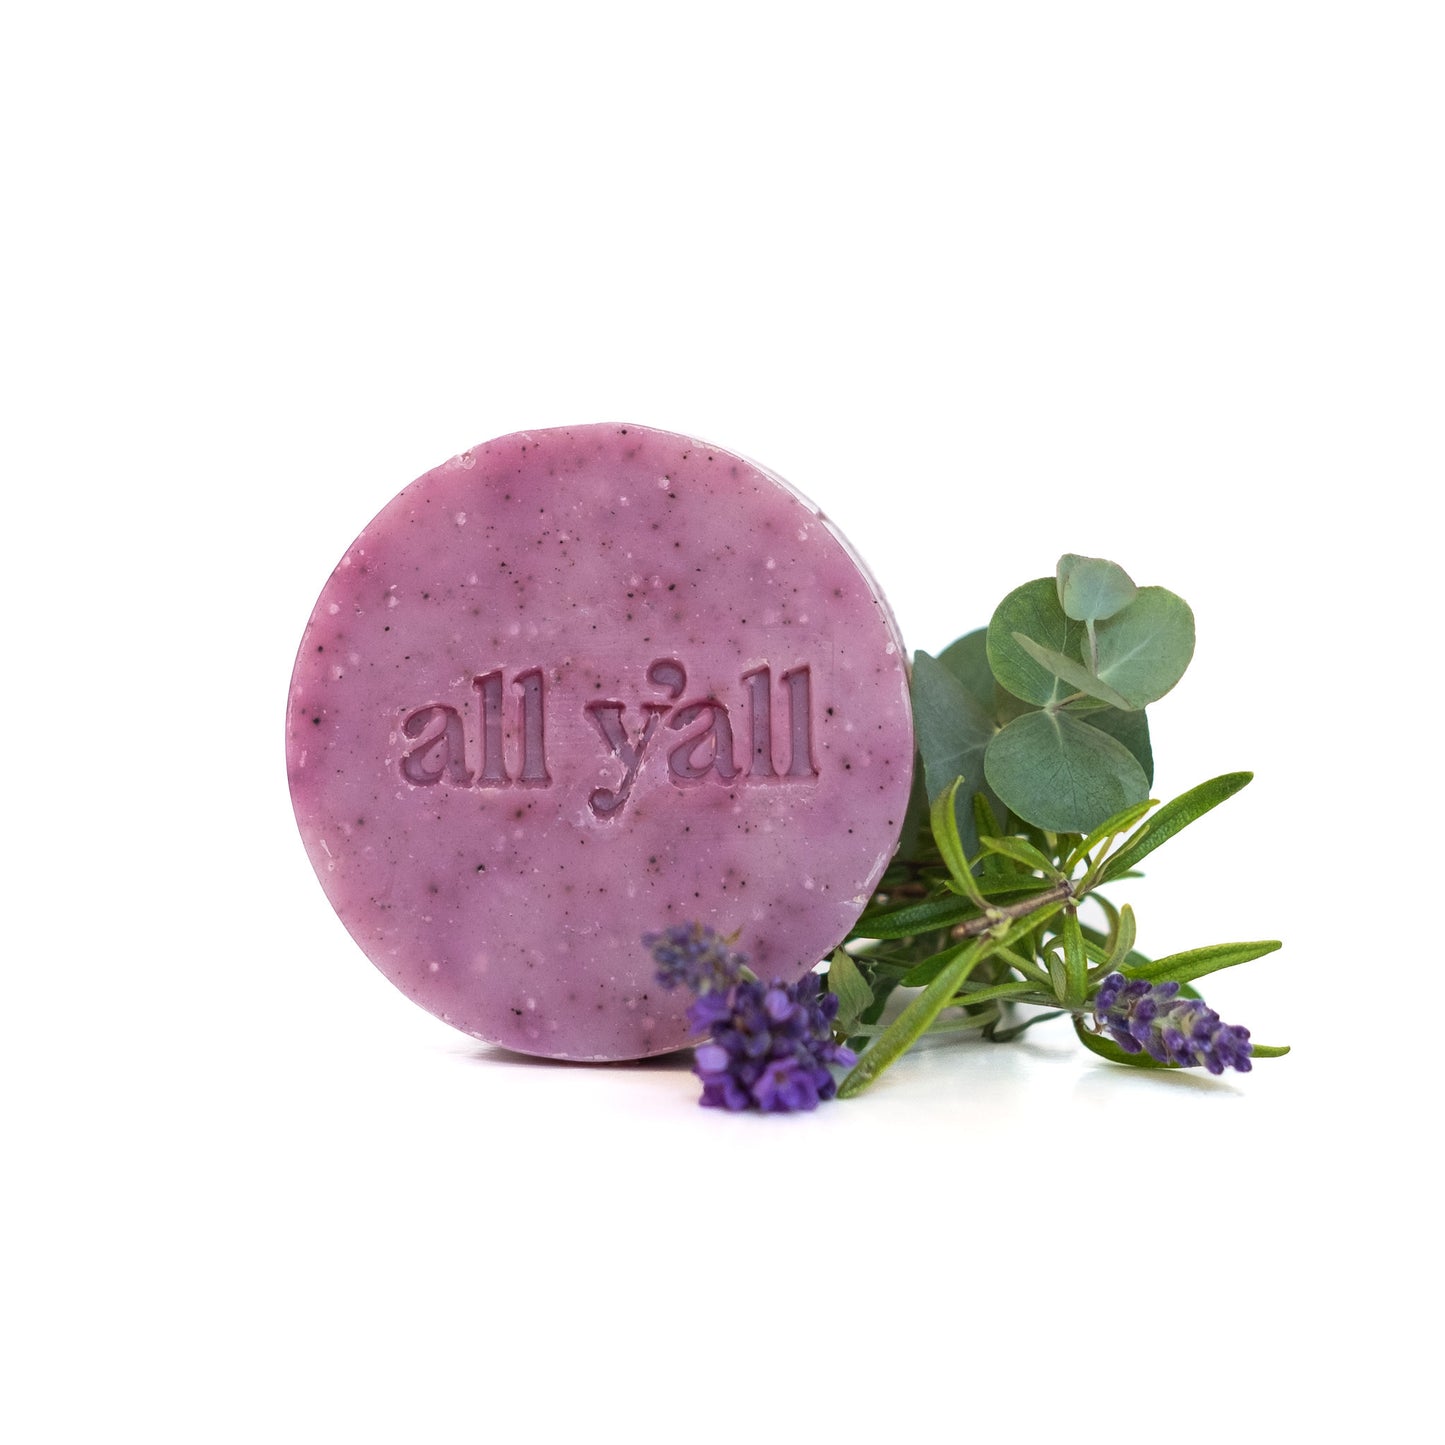 Calming scent of lavender and layered with grounding and herbaceous rosemary and eucalyptus | All Y'all Skincare